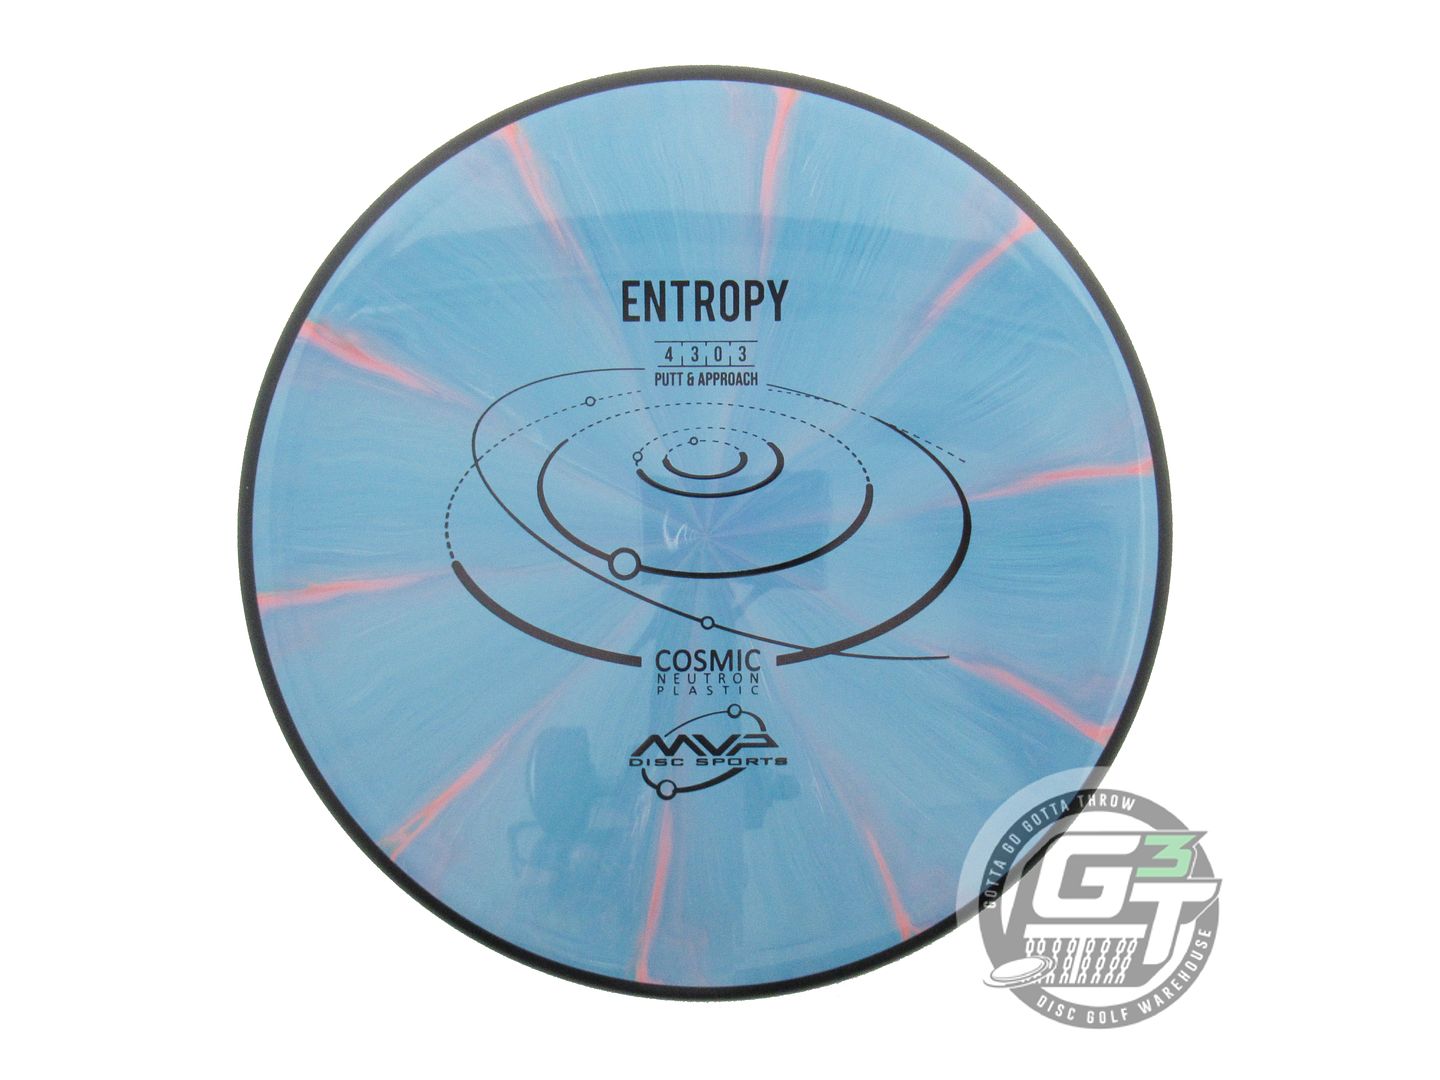 MVP Cosmic Neutron Entropy Putter Golf Disc (Individually Listed)